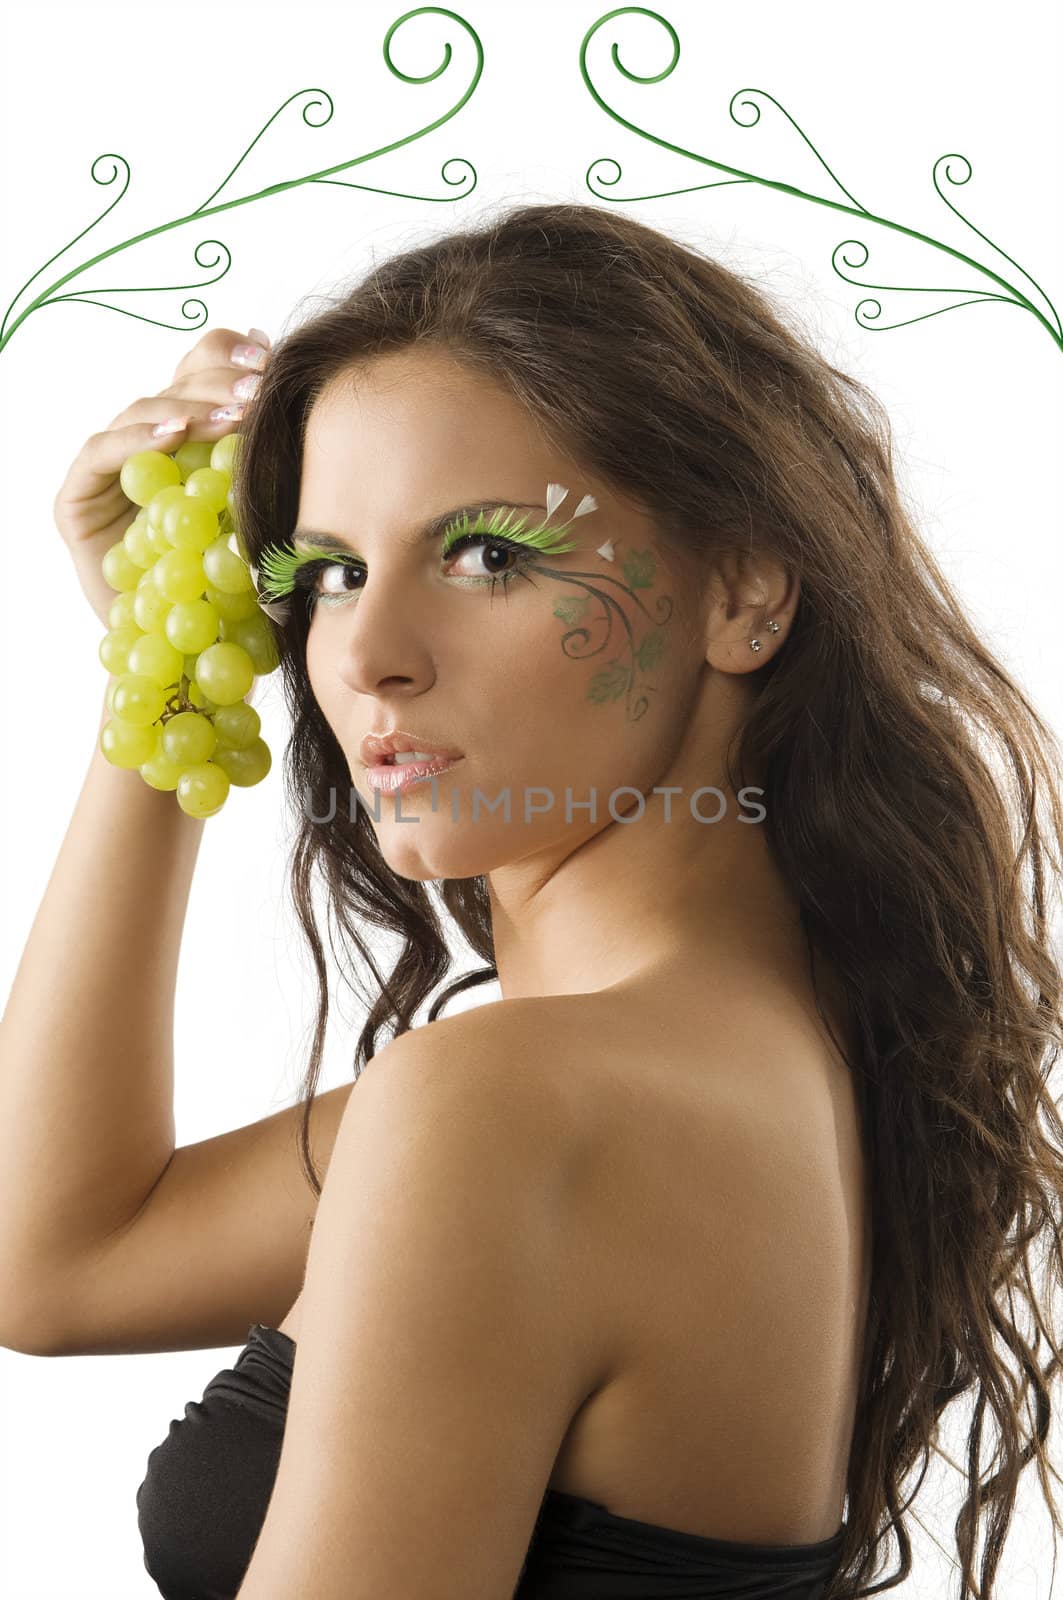 the grape and the girl by fotoCD